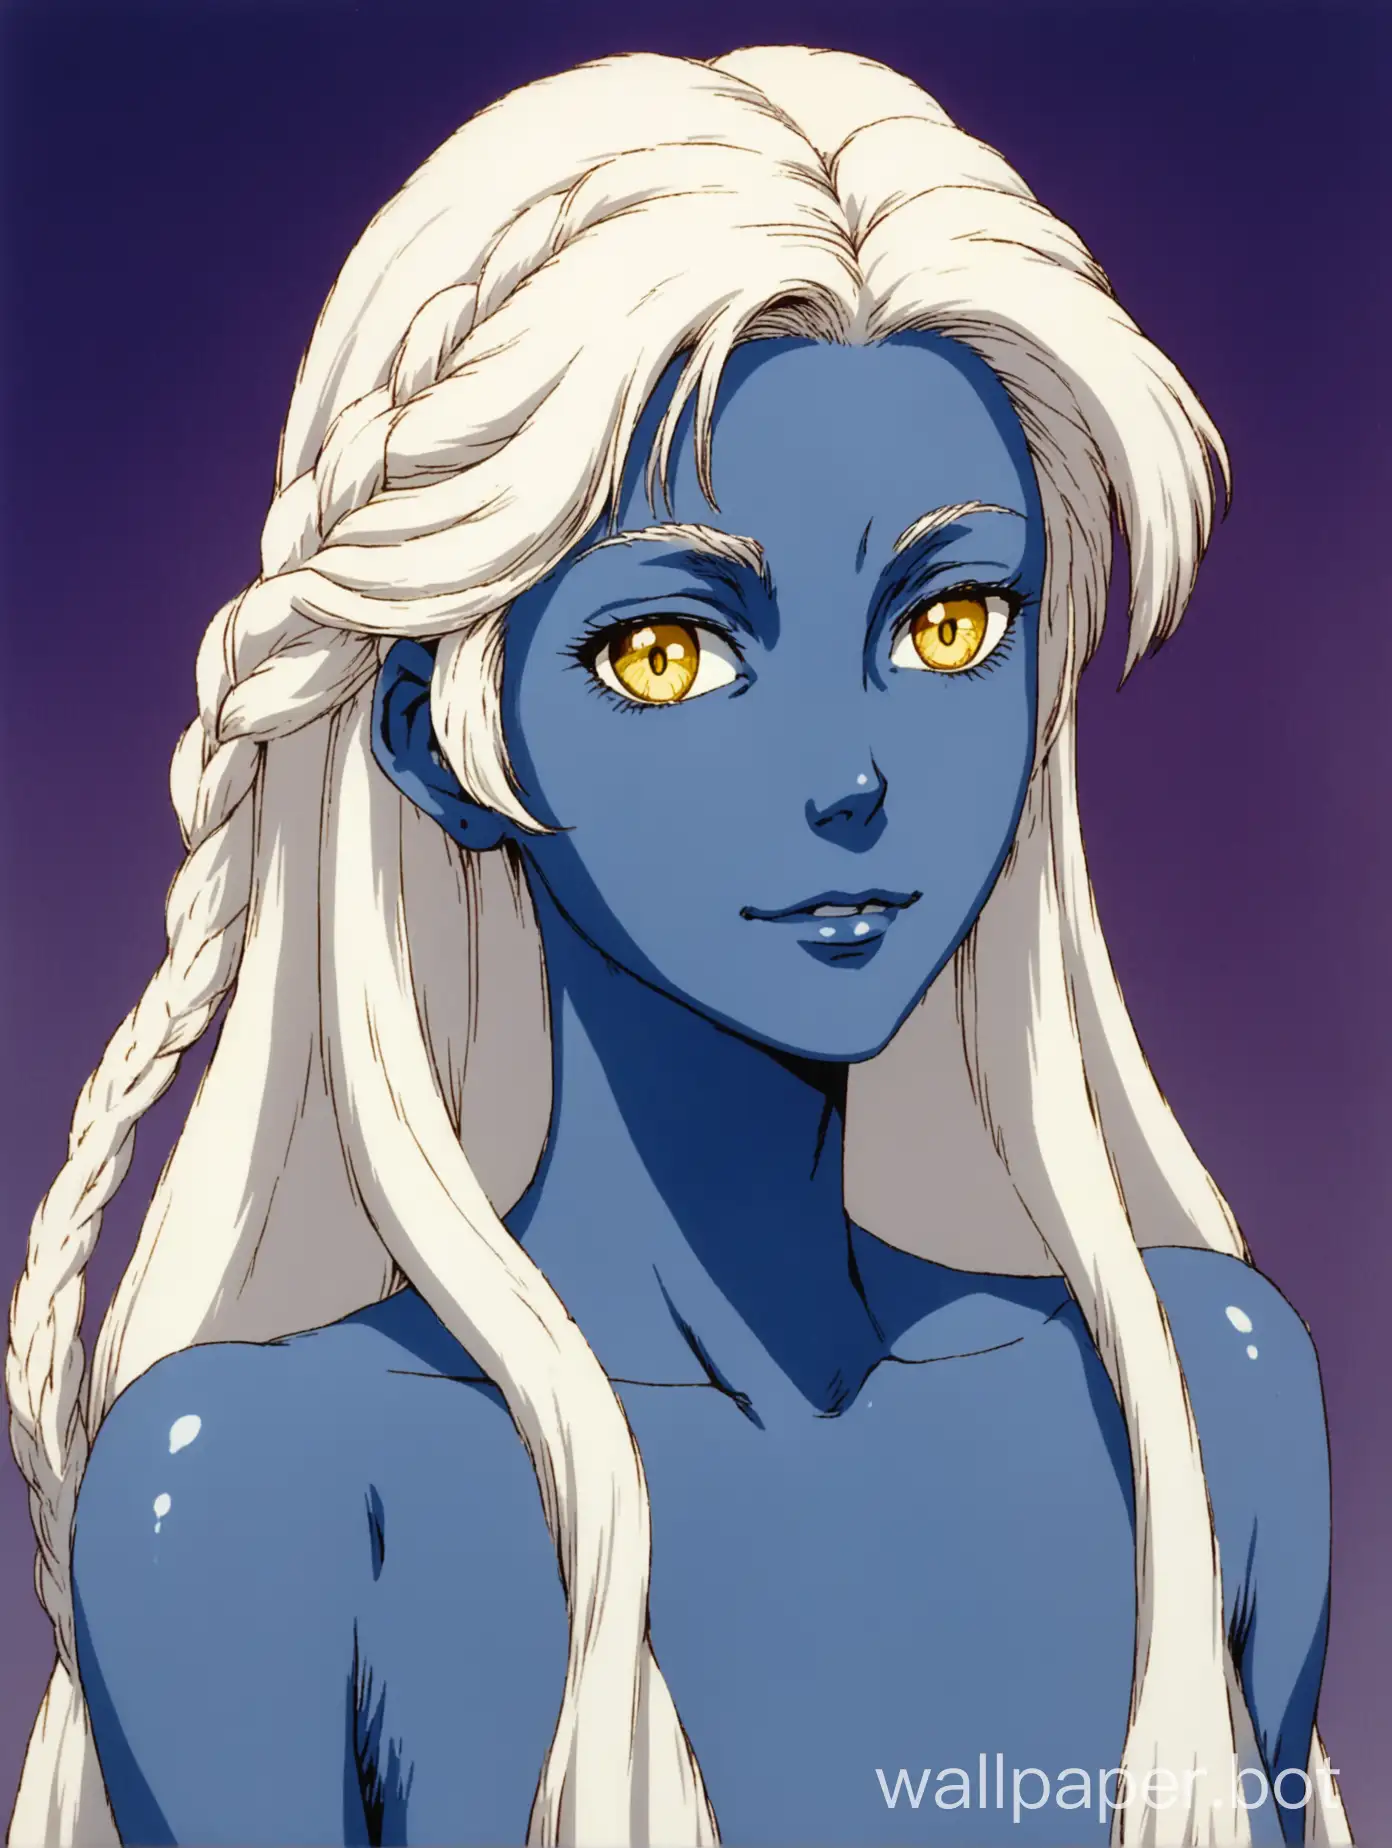 1980s retro anime, portrait of an attractive young woman standing regally, she has deep blue skin, her skin is completely blue, indigo blush, yellow eyes, she has messy loosely-braided white hair, mature face, kind expression, slight smile, sharp thin face, posing nude, slender and elegant, white pubic hair, affectionate and pretty